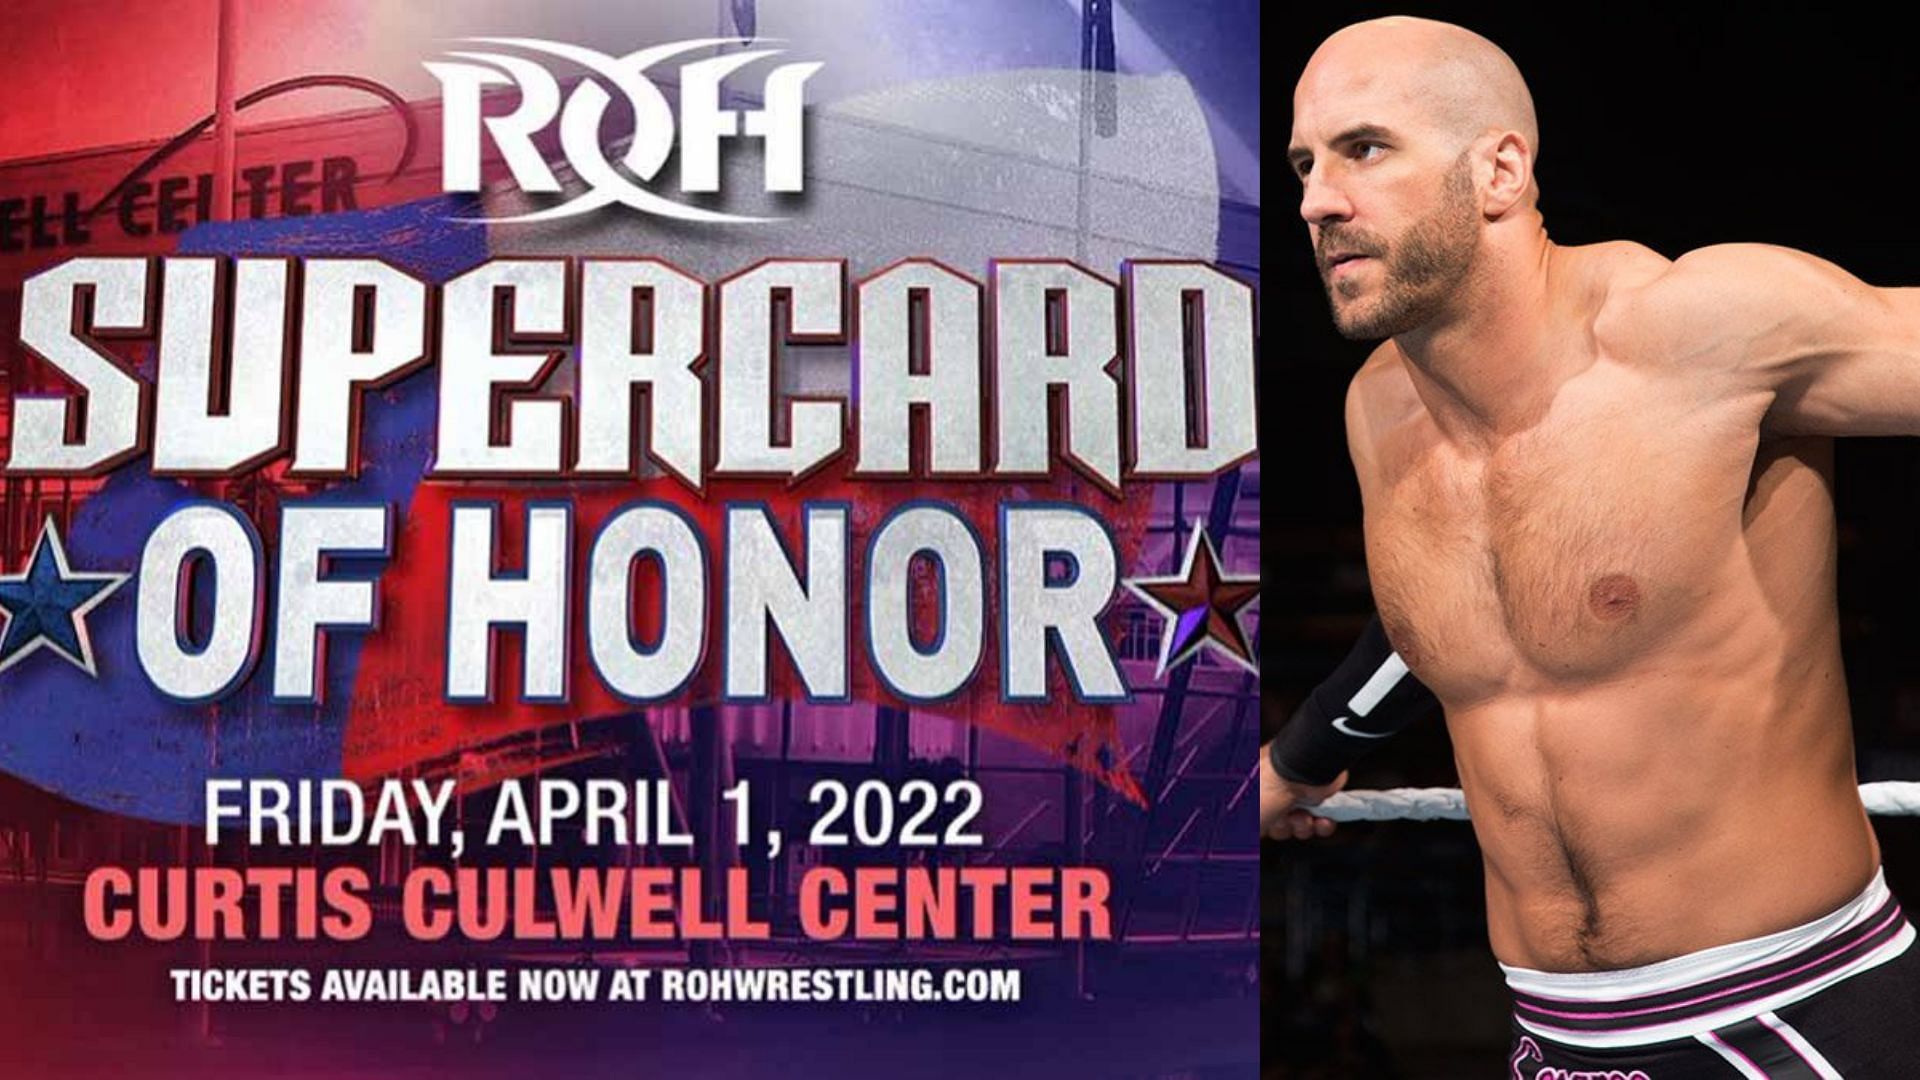 ROH Supercard of Honor is the first event under the Tony Khan era